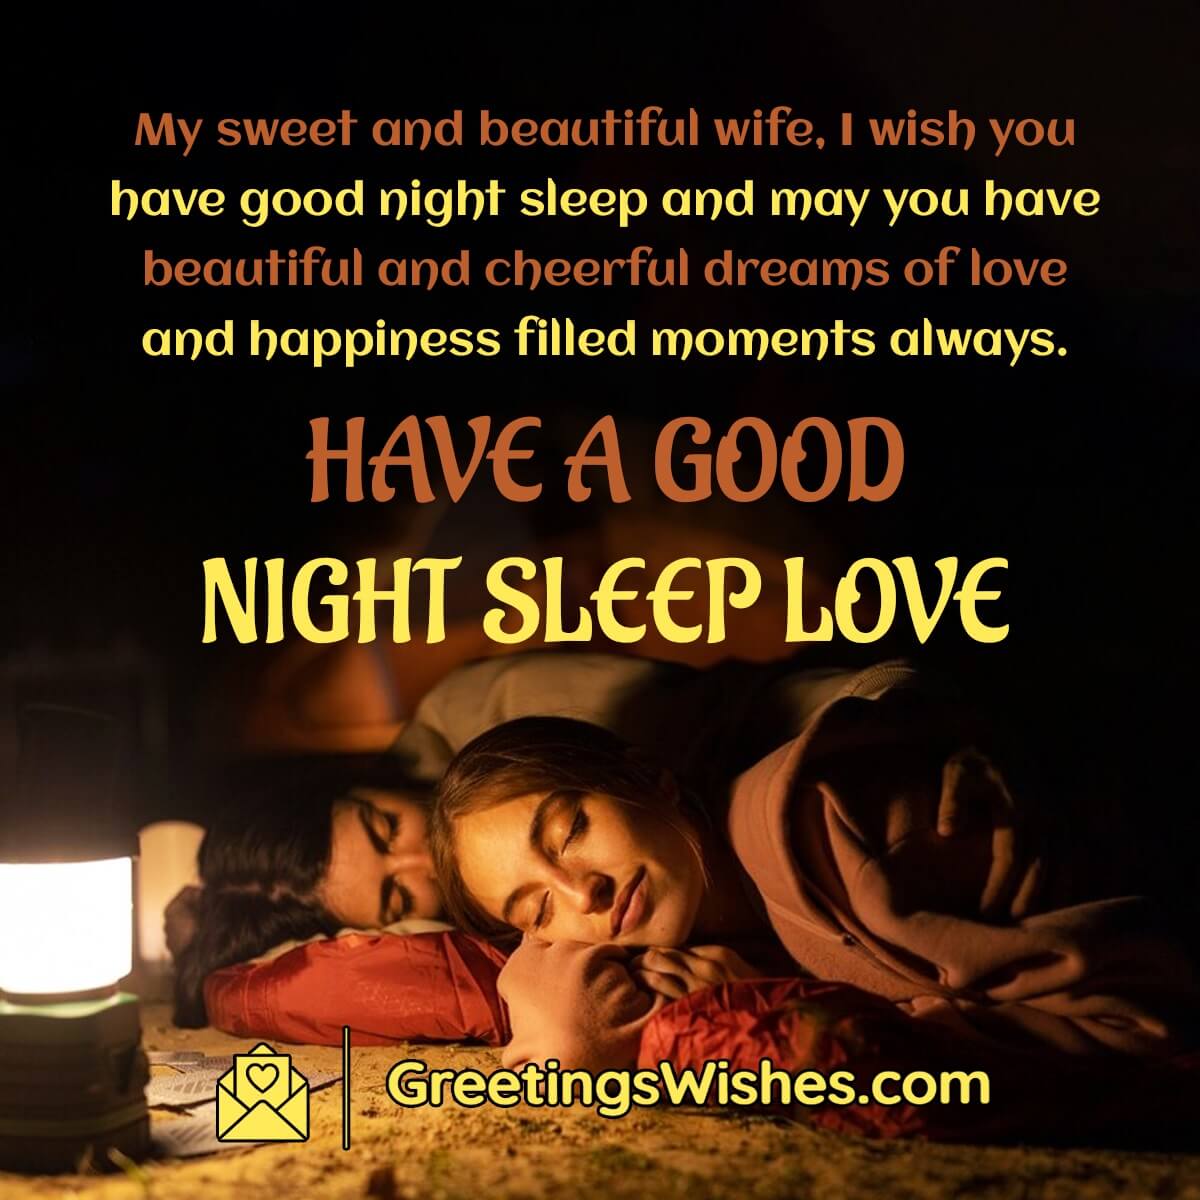 Good Night Messages to Wife - Greetings Wishes